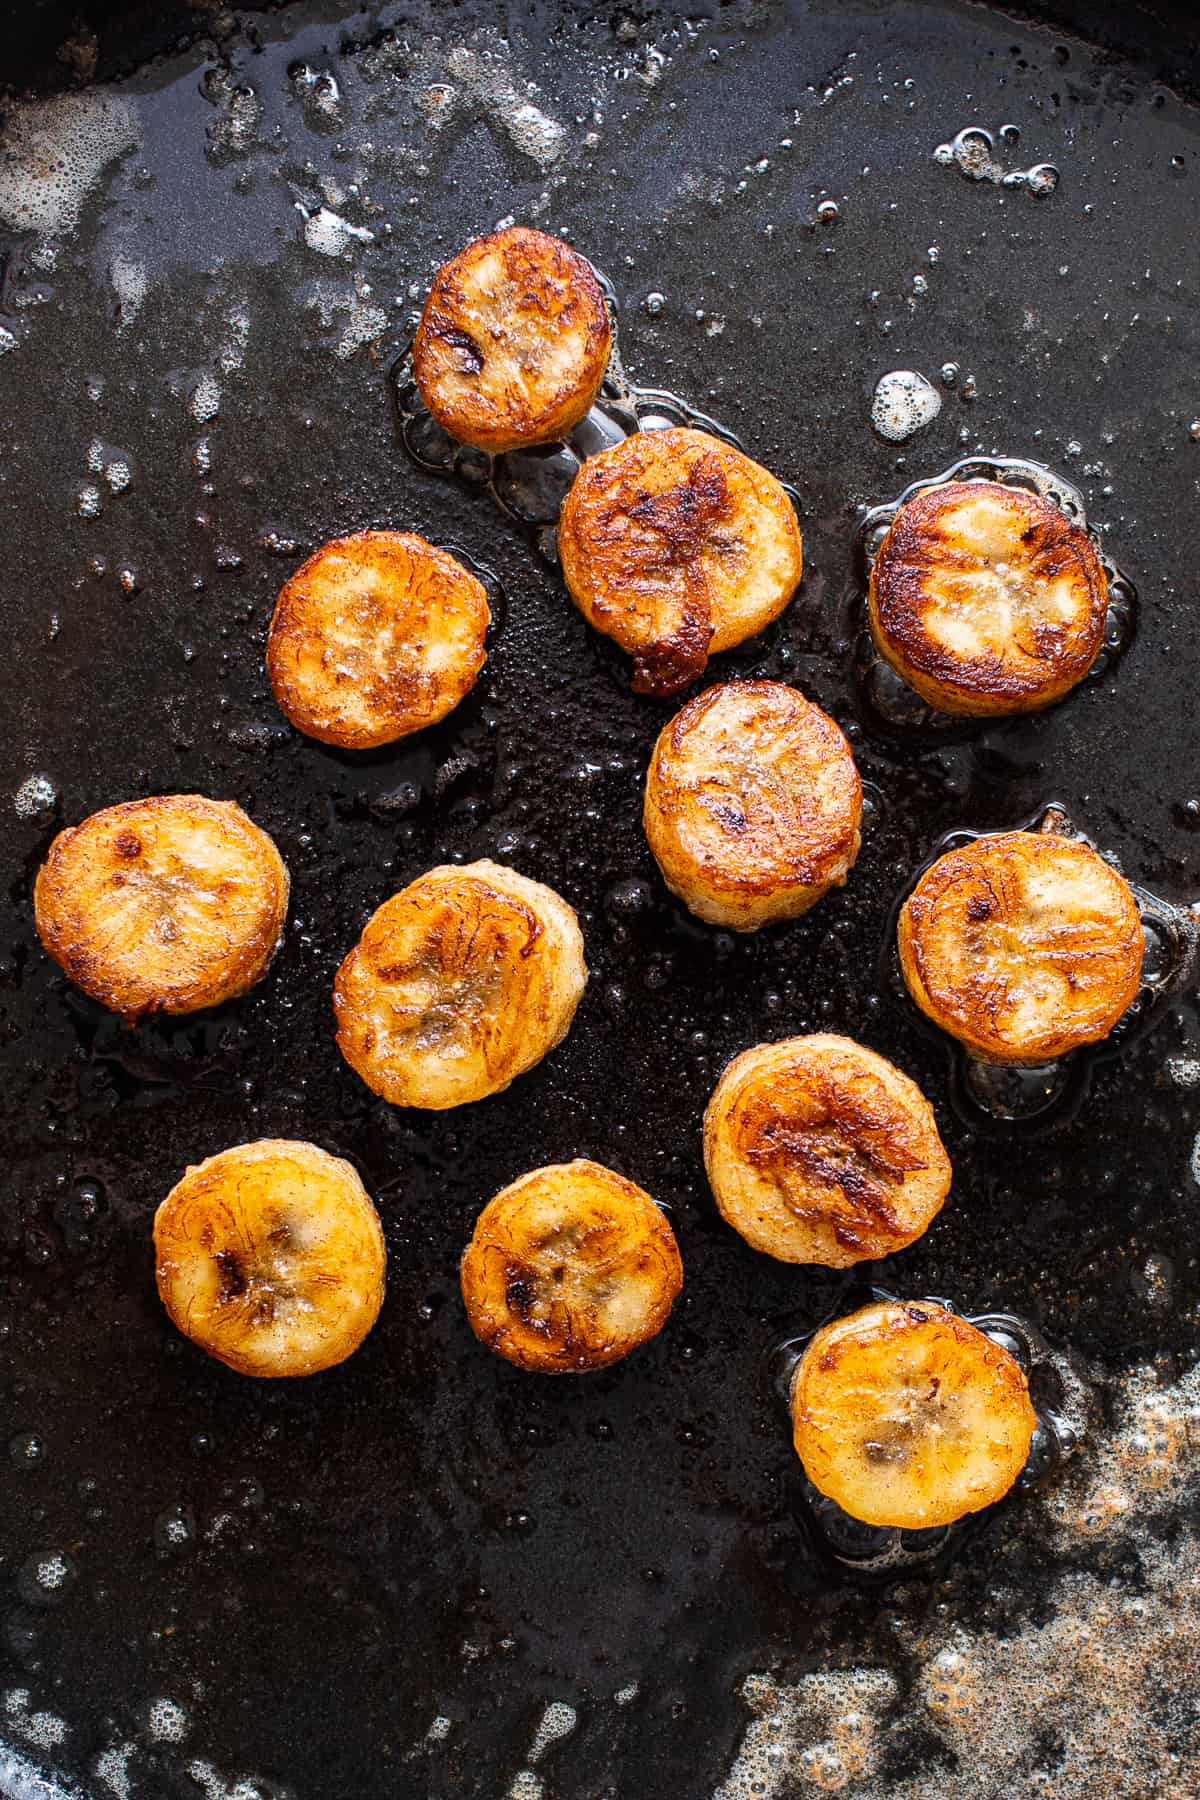 Caramelize the bananas in the pan.